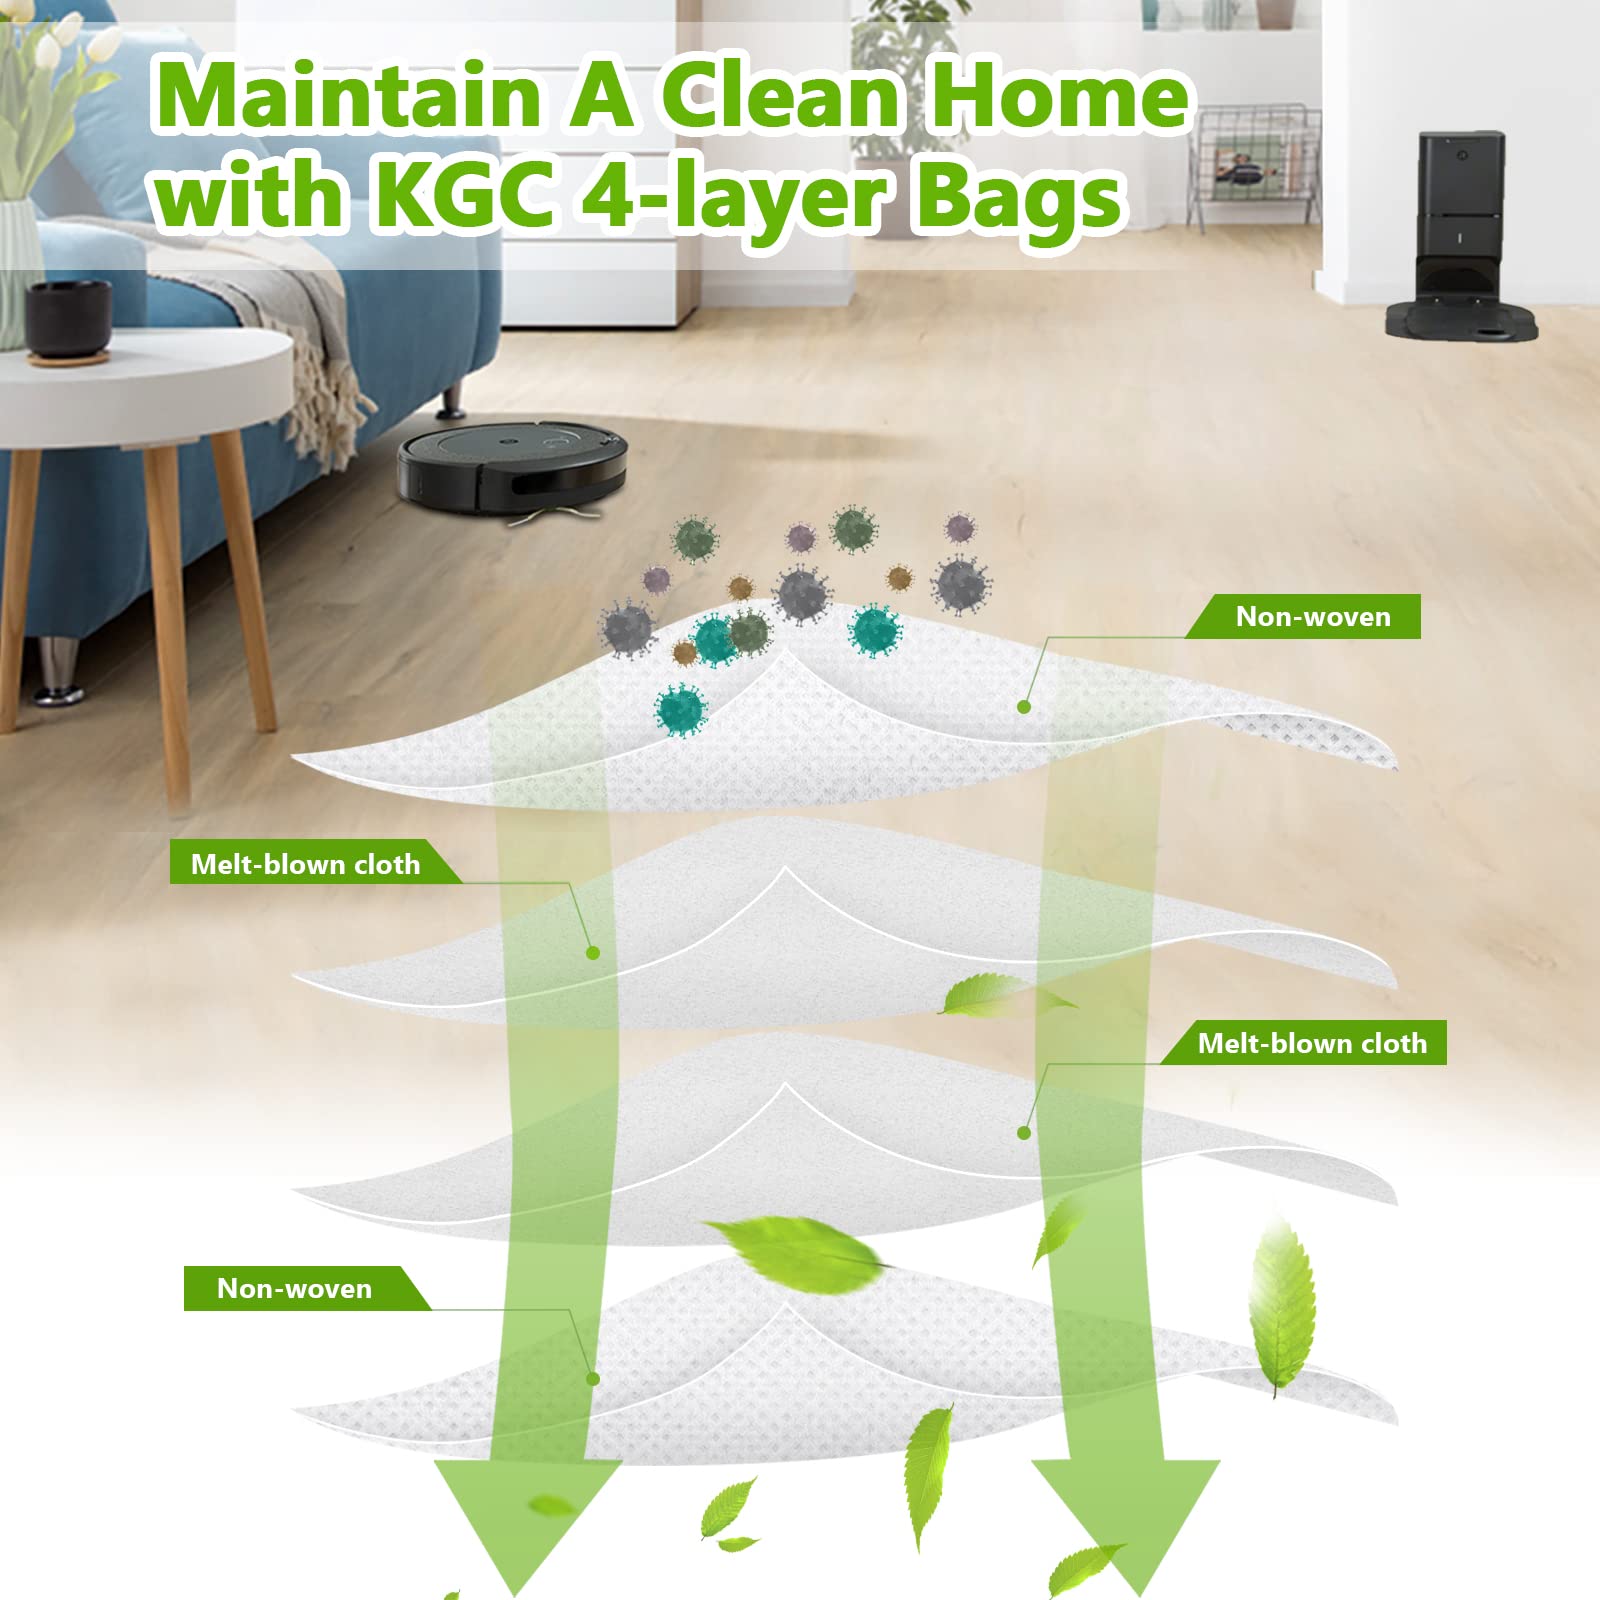 KGC 10 Pack Vacuum Bags Compatible with iRobot Roomba Bags i & s & j Series, Replacement for iRobot Roomba i1+ i3+(3550) i4+ i6+ i7+ i7Plus j7+(7550) i8+ s9+ Vacuum with Automatic Dirt Disposal Bags